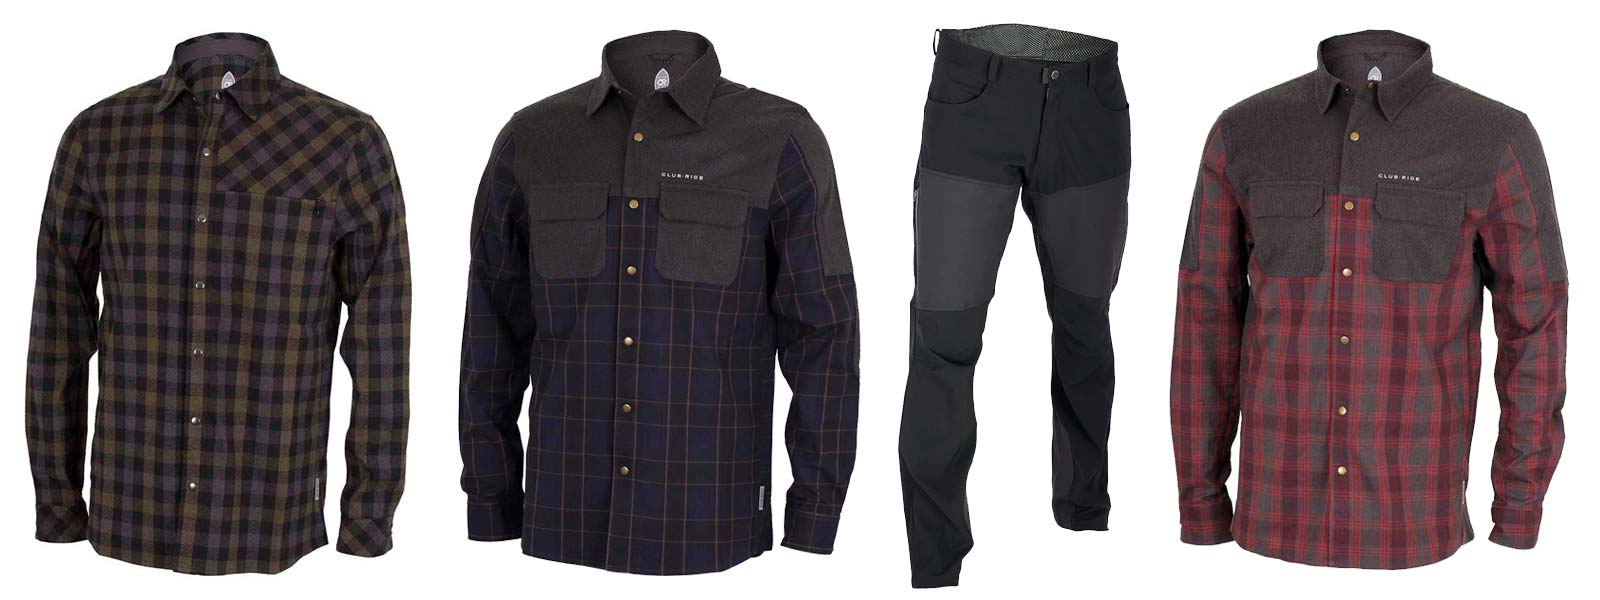 Fall - Winter Club Ride Clothing Now in Stock